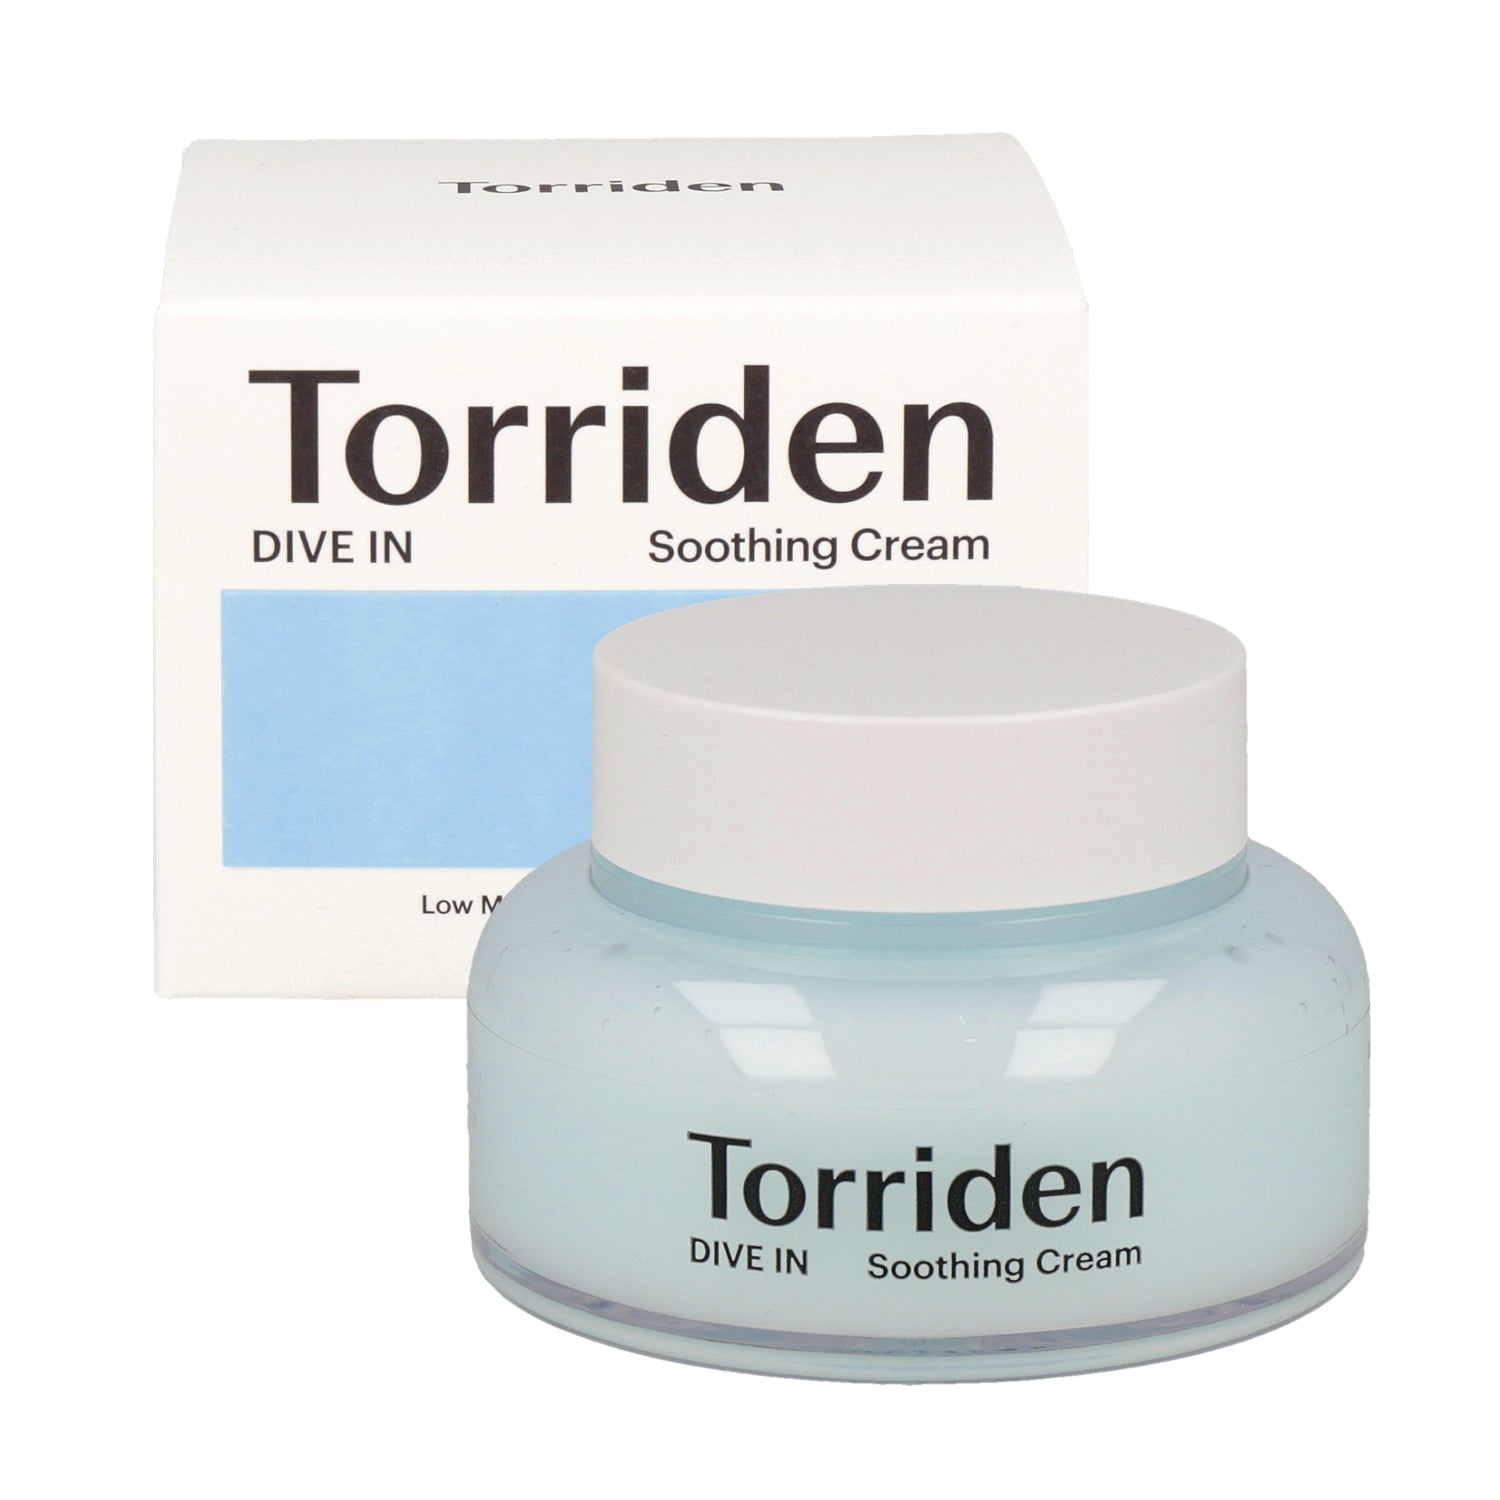 The Torriden DIVE-IN Low Molecular Hyaluronic Acid Soothing Cream 100ml is a soothing and hydrating cream designed to provide deep moisture and comfort to the skin